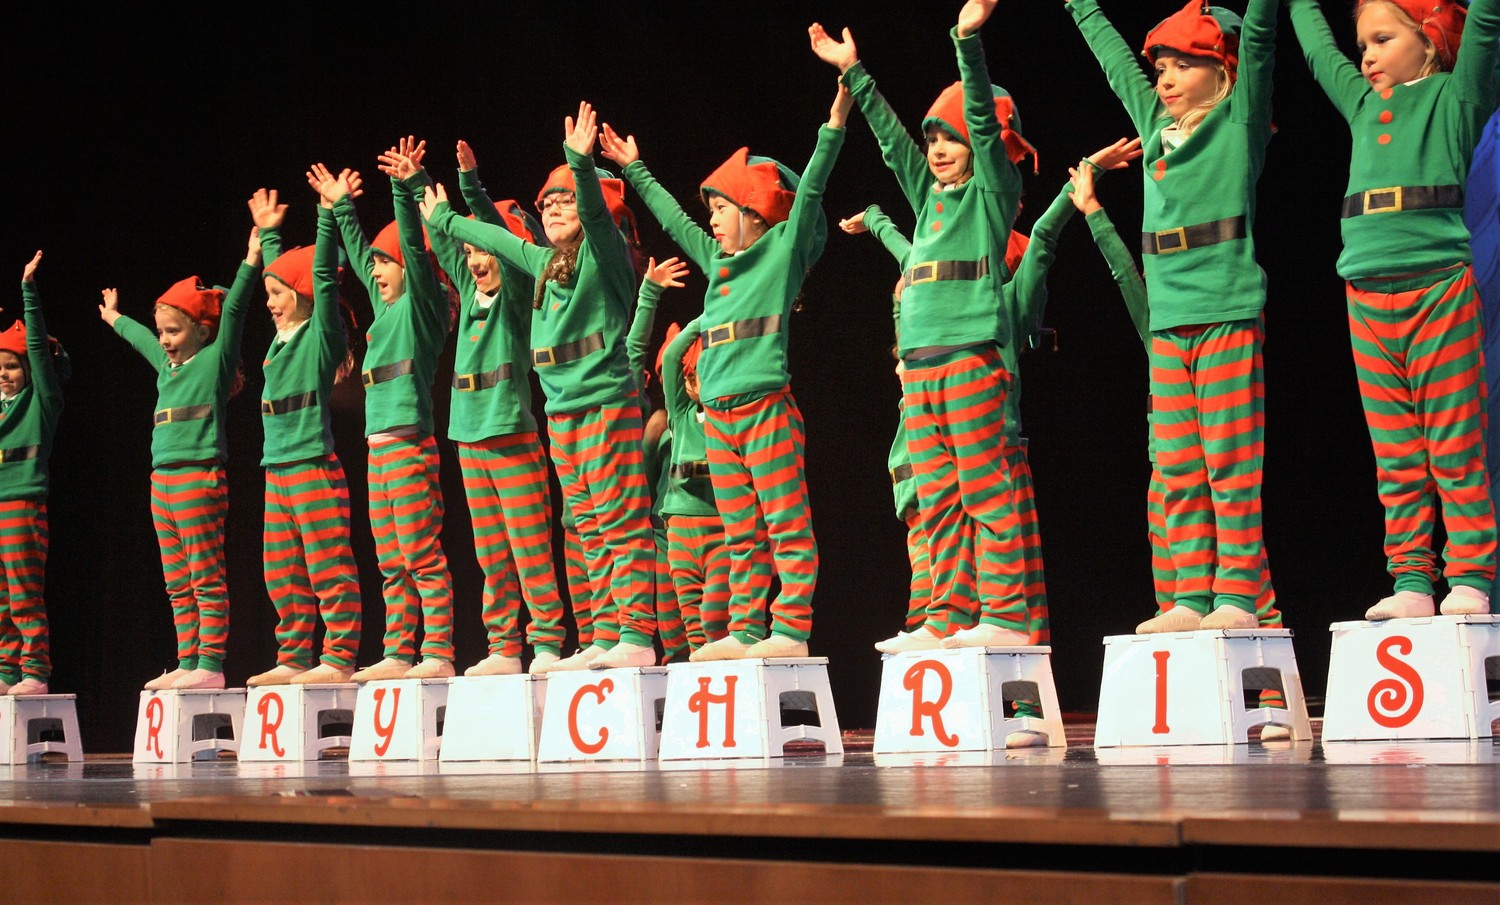 Elves wish the audience a merry Christmas.